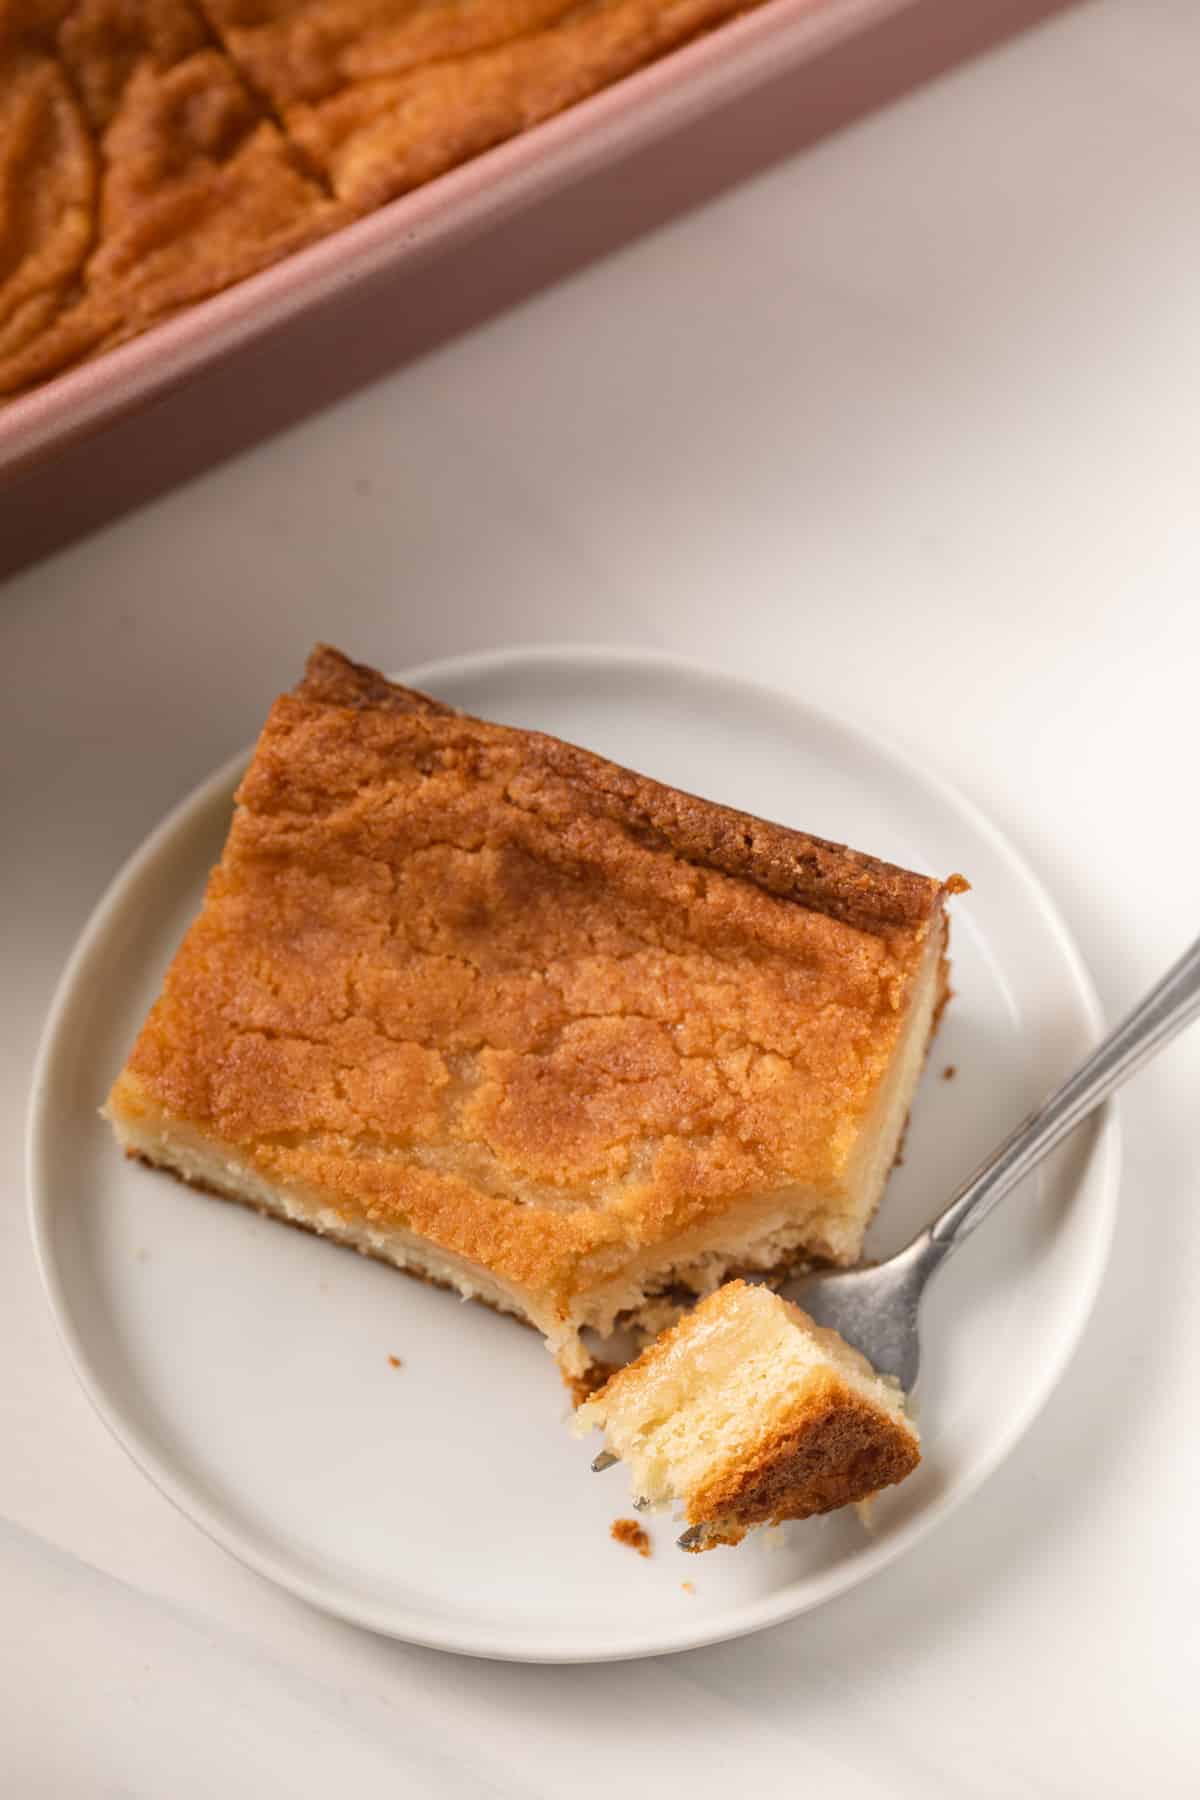 Slice of gooey butter cake on white plate with fork taking a bite out.